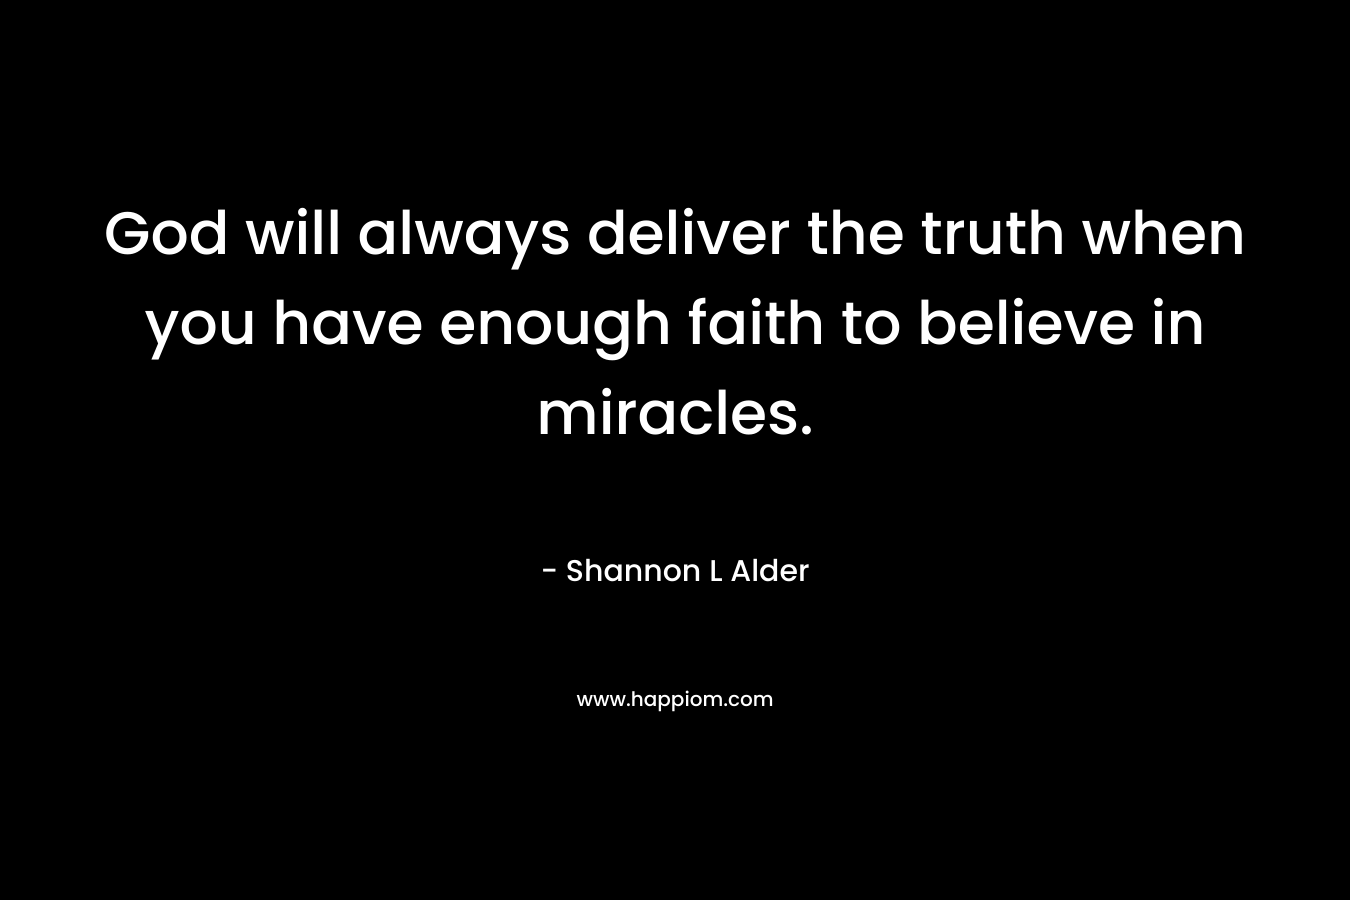 God will always deliver the truth when you have enough faith to believe in miracles. – Shannon L Alder